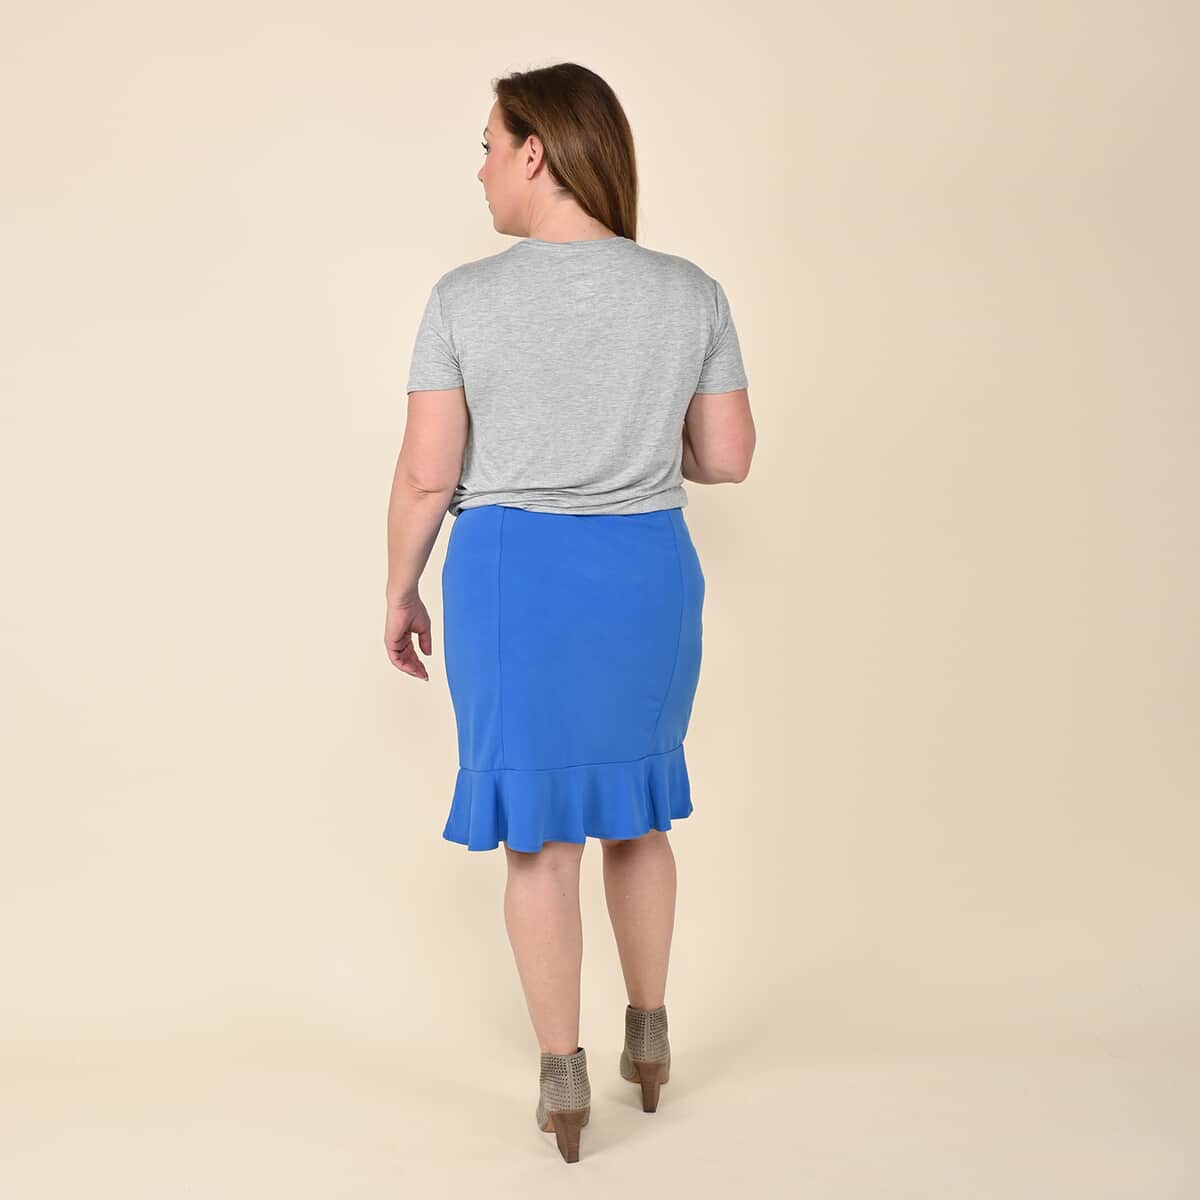 Tamsy Navy Knit Skirt with Elastic Waist - Large image number 1